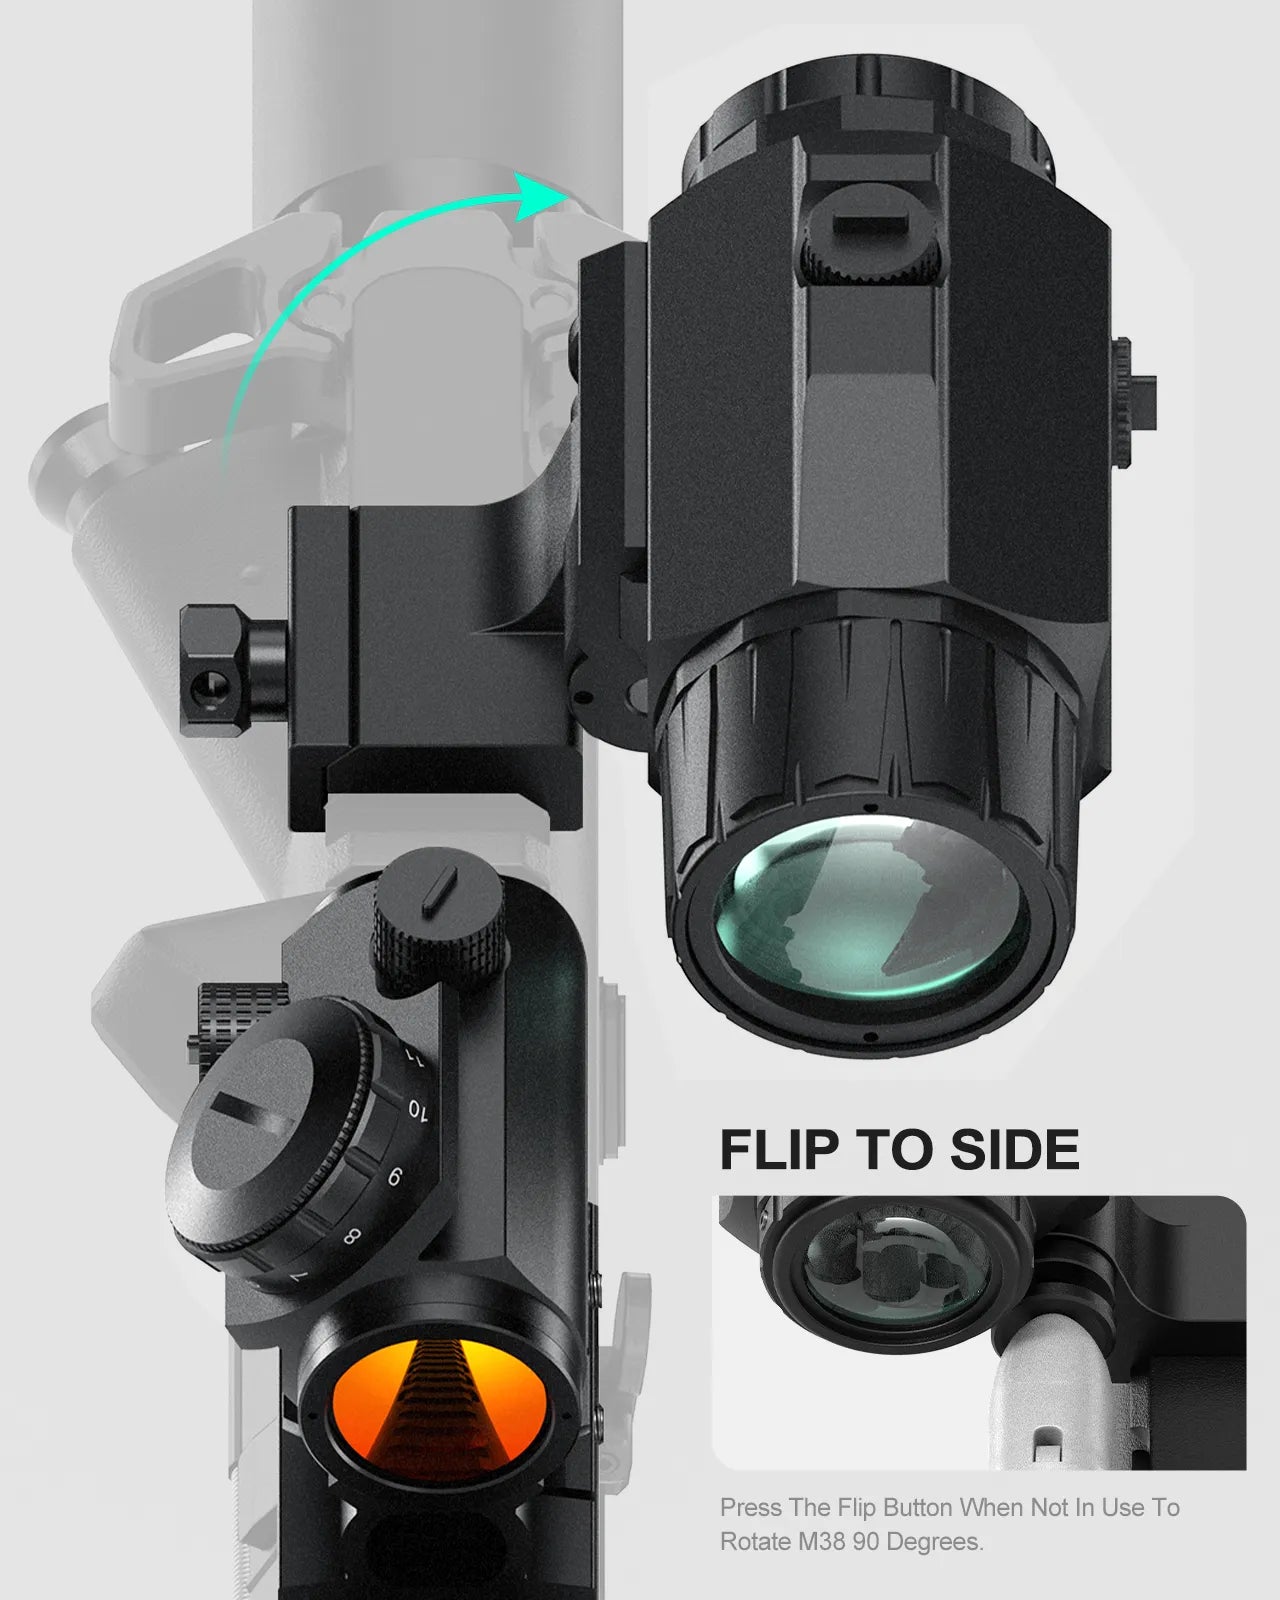 Feyachi RS-23 Red Dot Sight with M38 5X Magnifier Combo Kit, Absolute Co-Witness